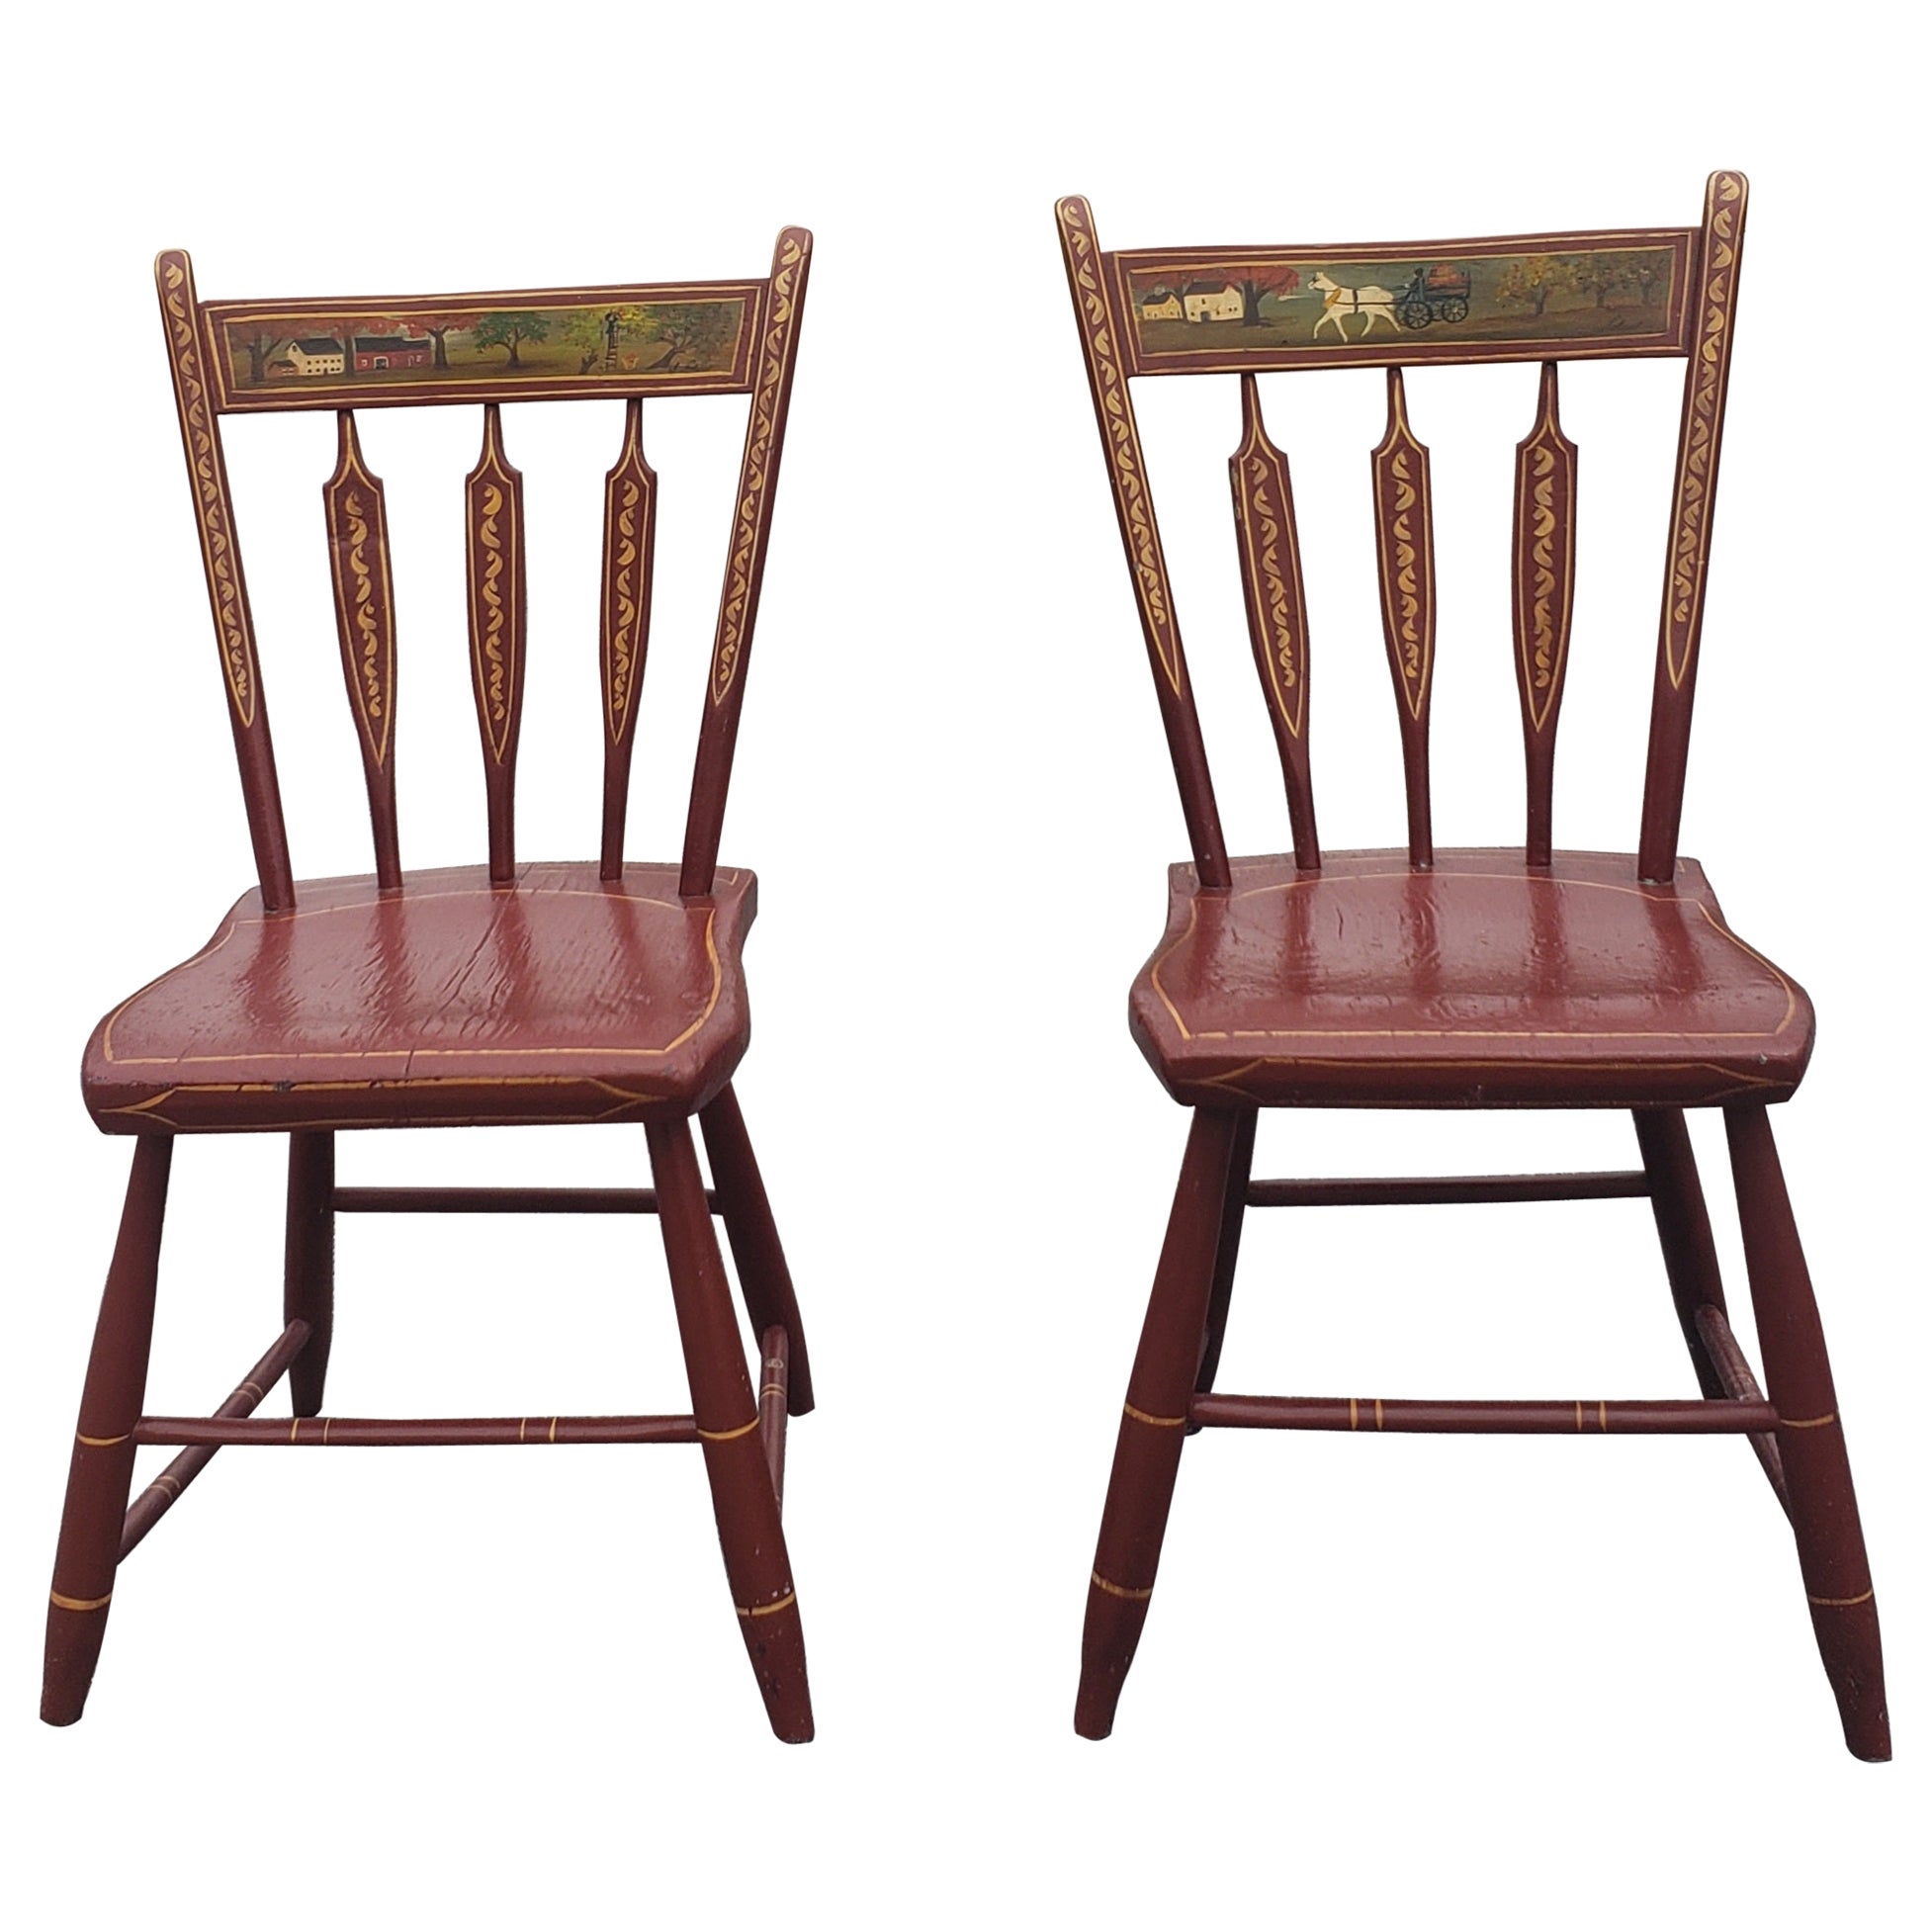 Pair of 19th Century. Signed Hand Painted and Decorated Plank Seat Side Chairs For Sale